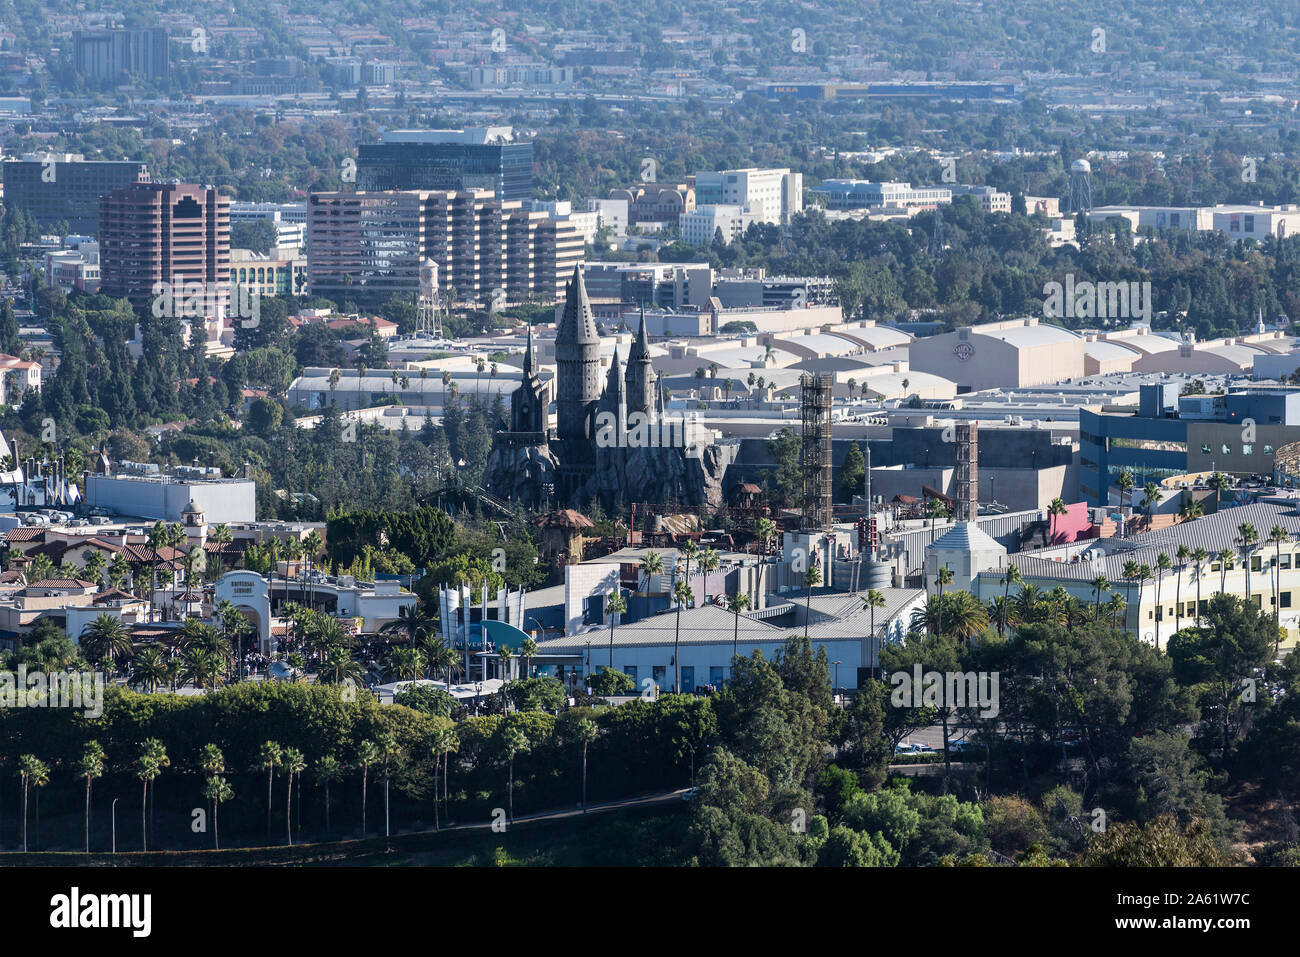 Los Angeles County, California, USA - October 20, 2019:  Morning view of Universal City Hollywood attractions and Warner Bros sound stages. Stock Photo